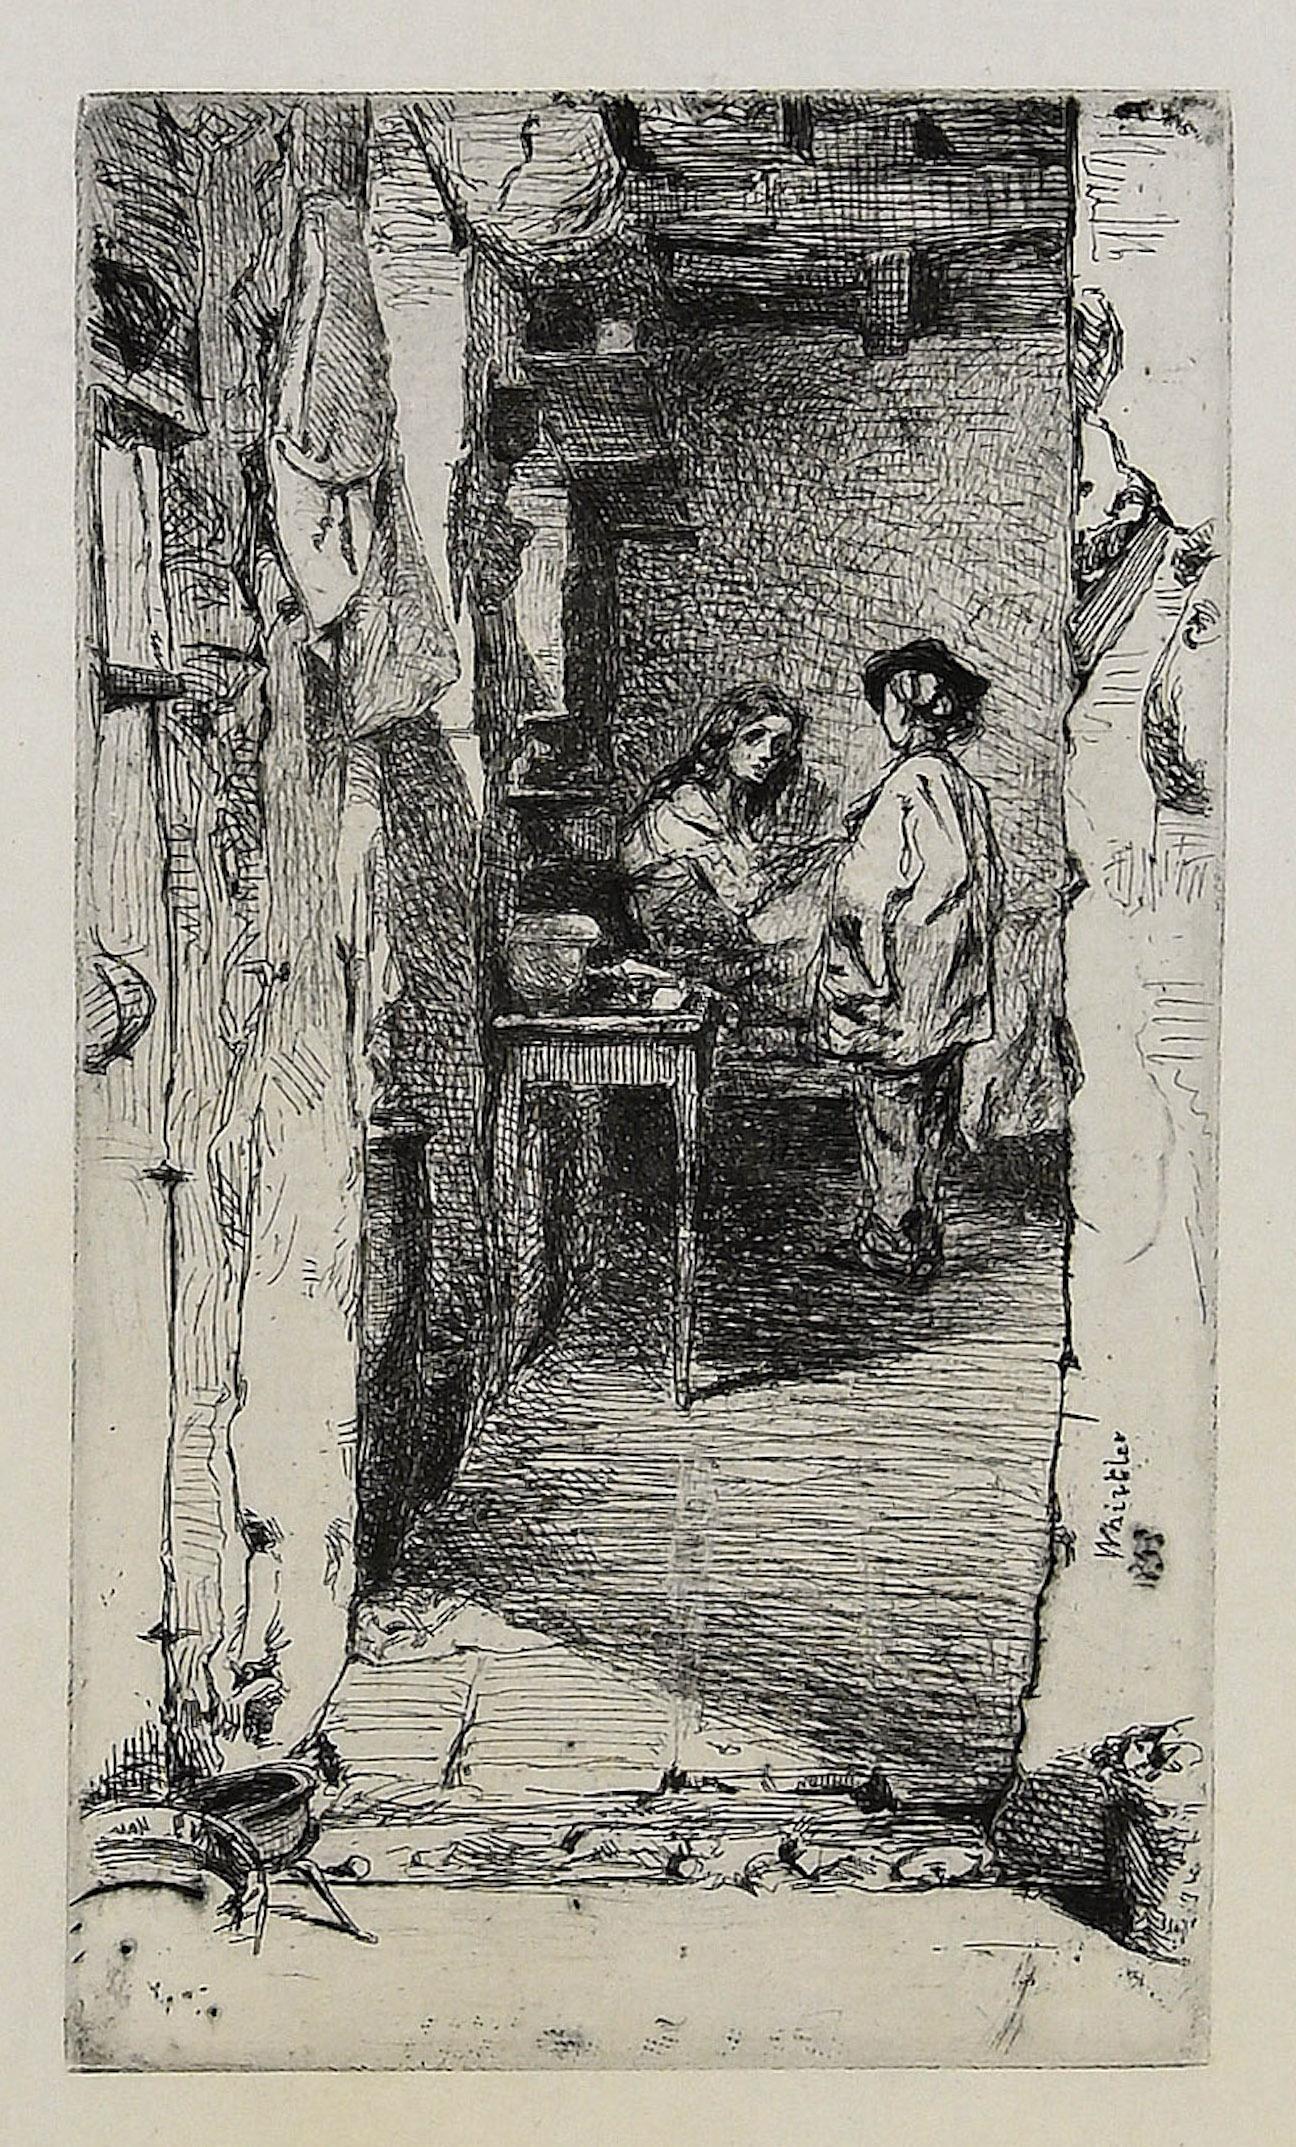 The Rag Gatherers - Original Etching by J.A. Whistler - 1858